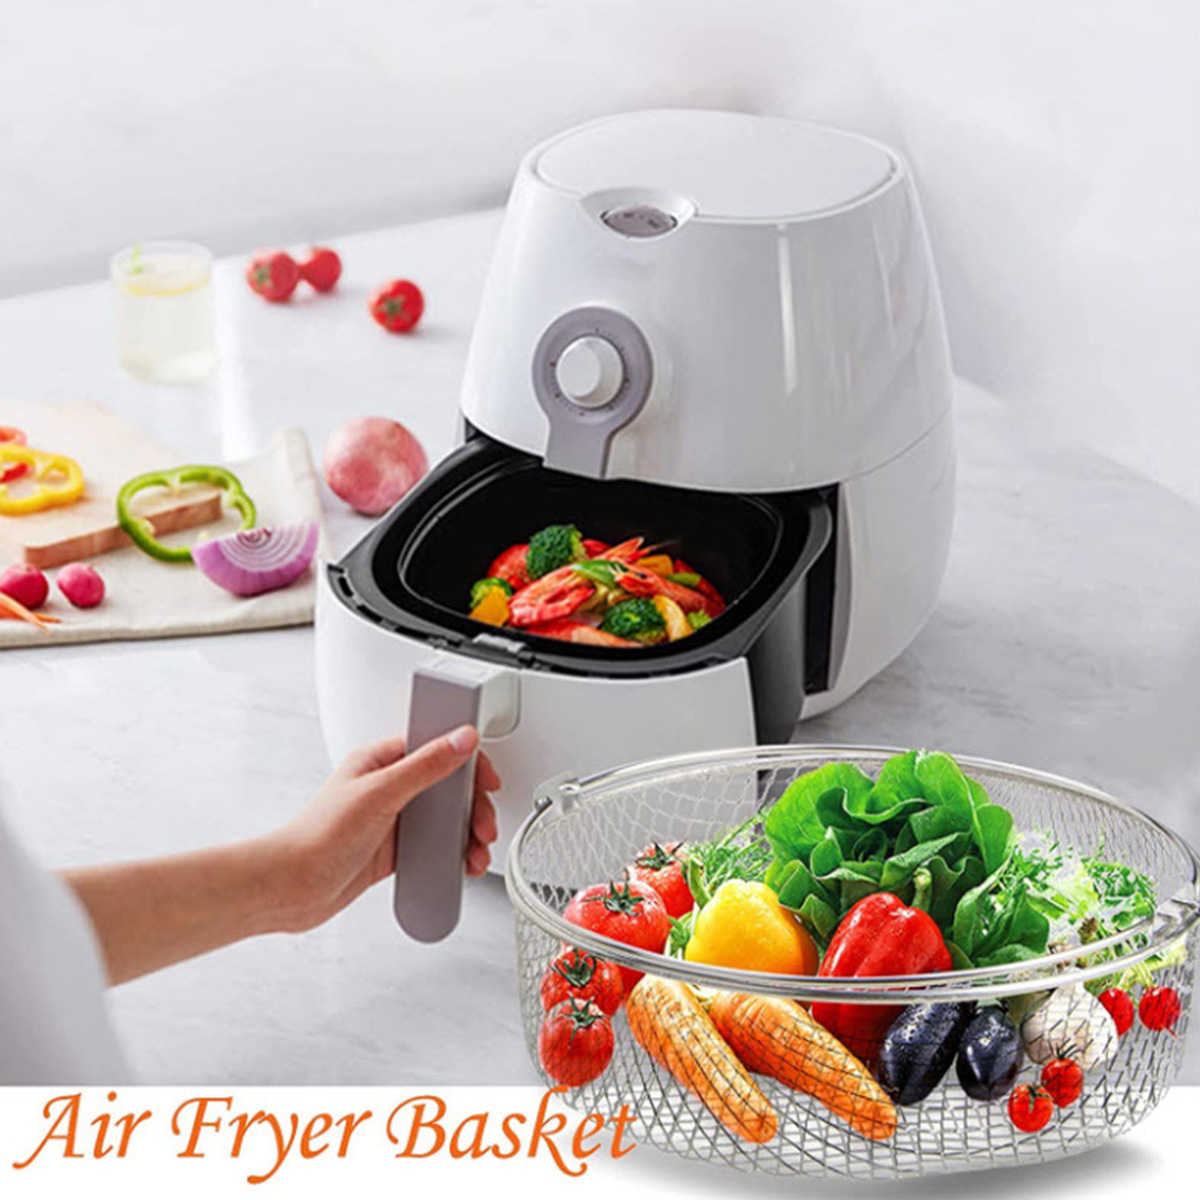  Air Fryer Basket For Oven, Stainless Steel Air Fryer Tray,  Non-stick Mesh Basket Set, Oven Air Fryer Basket Wire Rack Roasting Basket,  2 Piece Set : Home & Kitchen